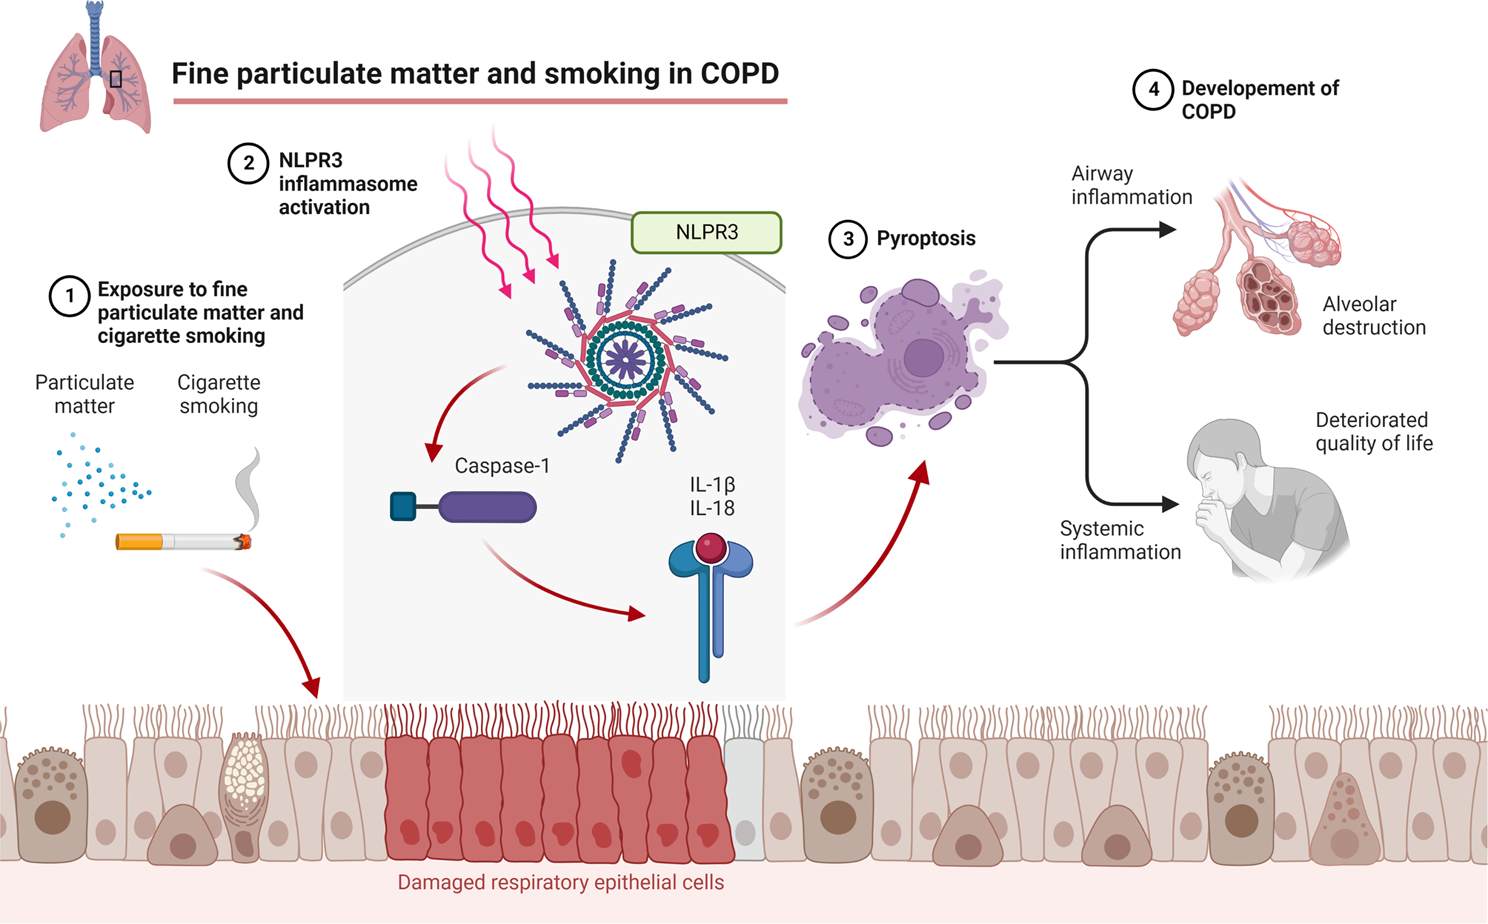 Fine particulate matter aggravates smoking induced lung injury via NLRP3/caspase-1 pathway in COPD